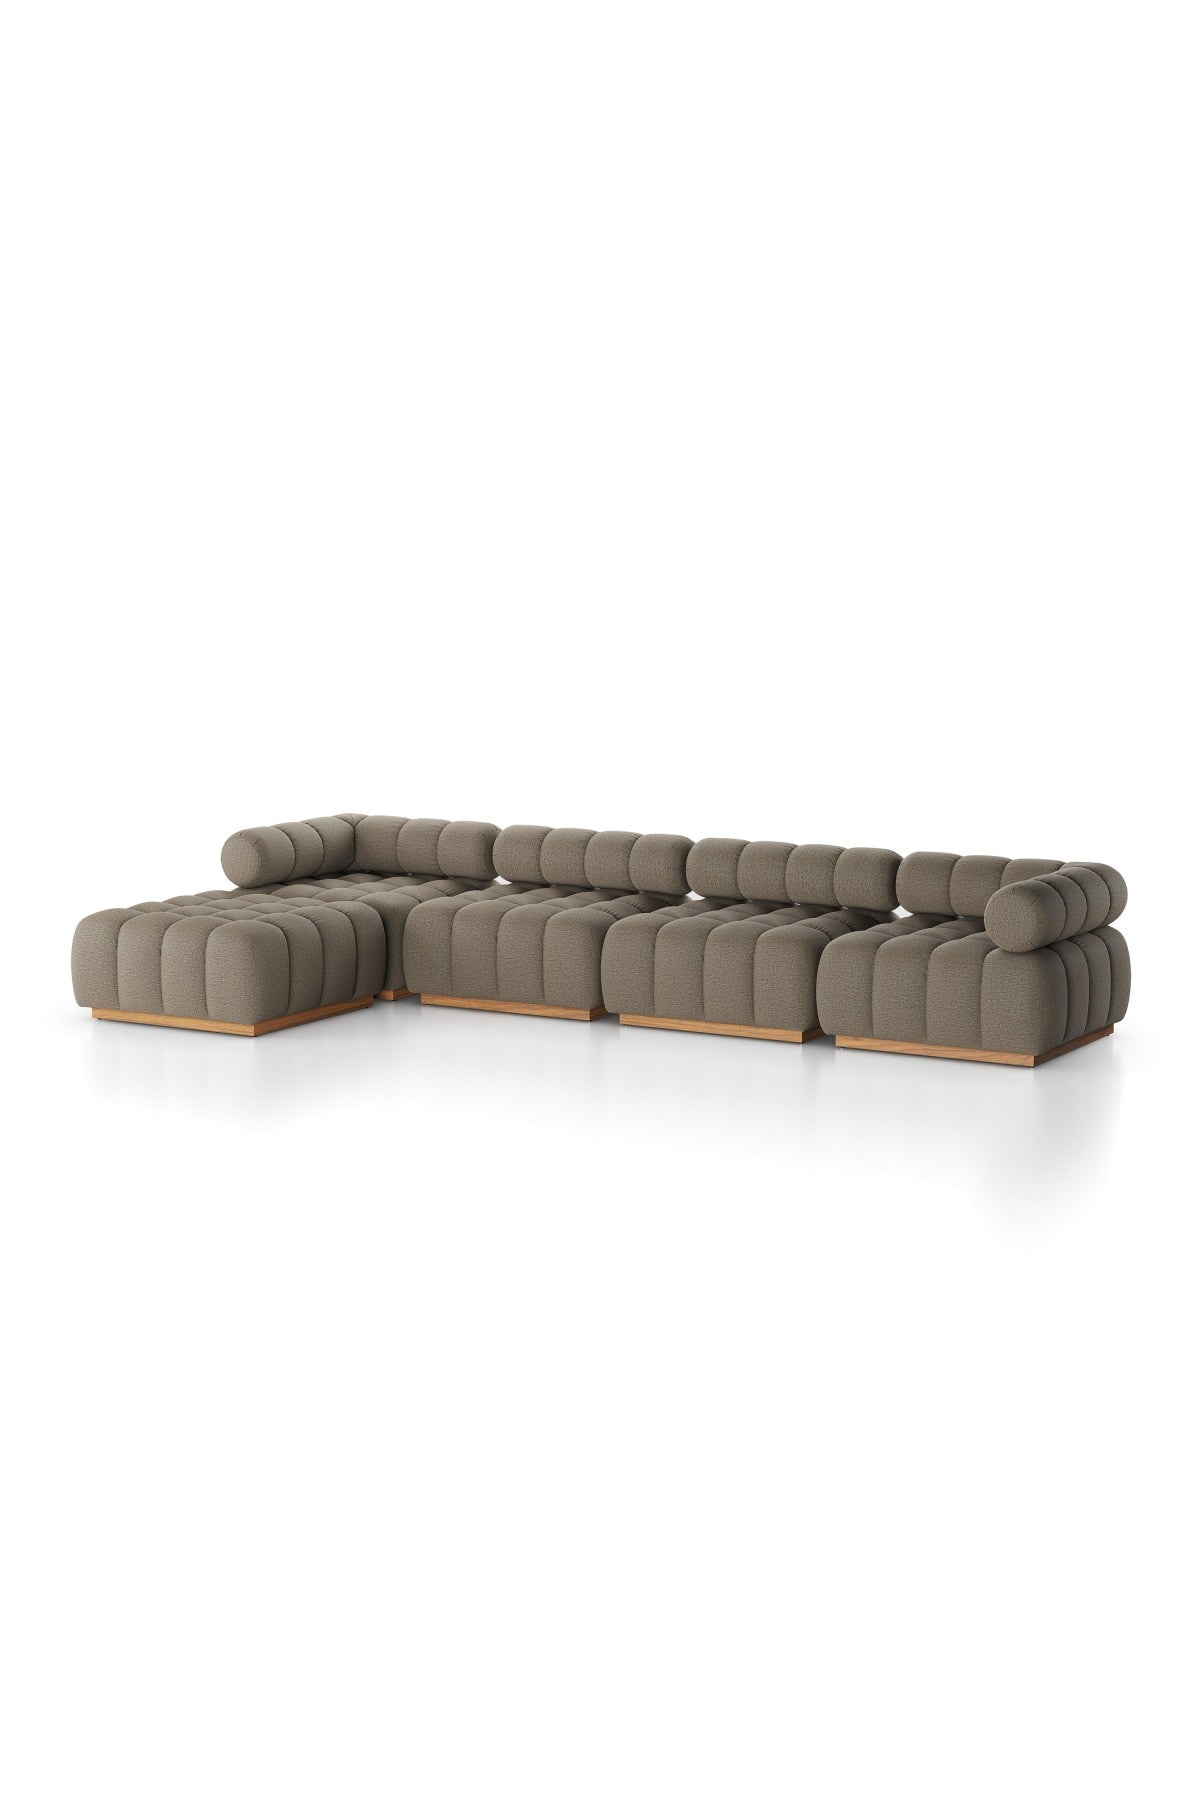 Havana Outdoor 4-Piece Sectional with Ottoman